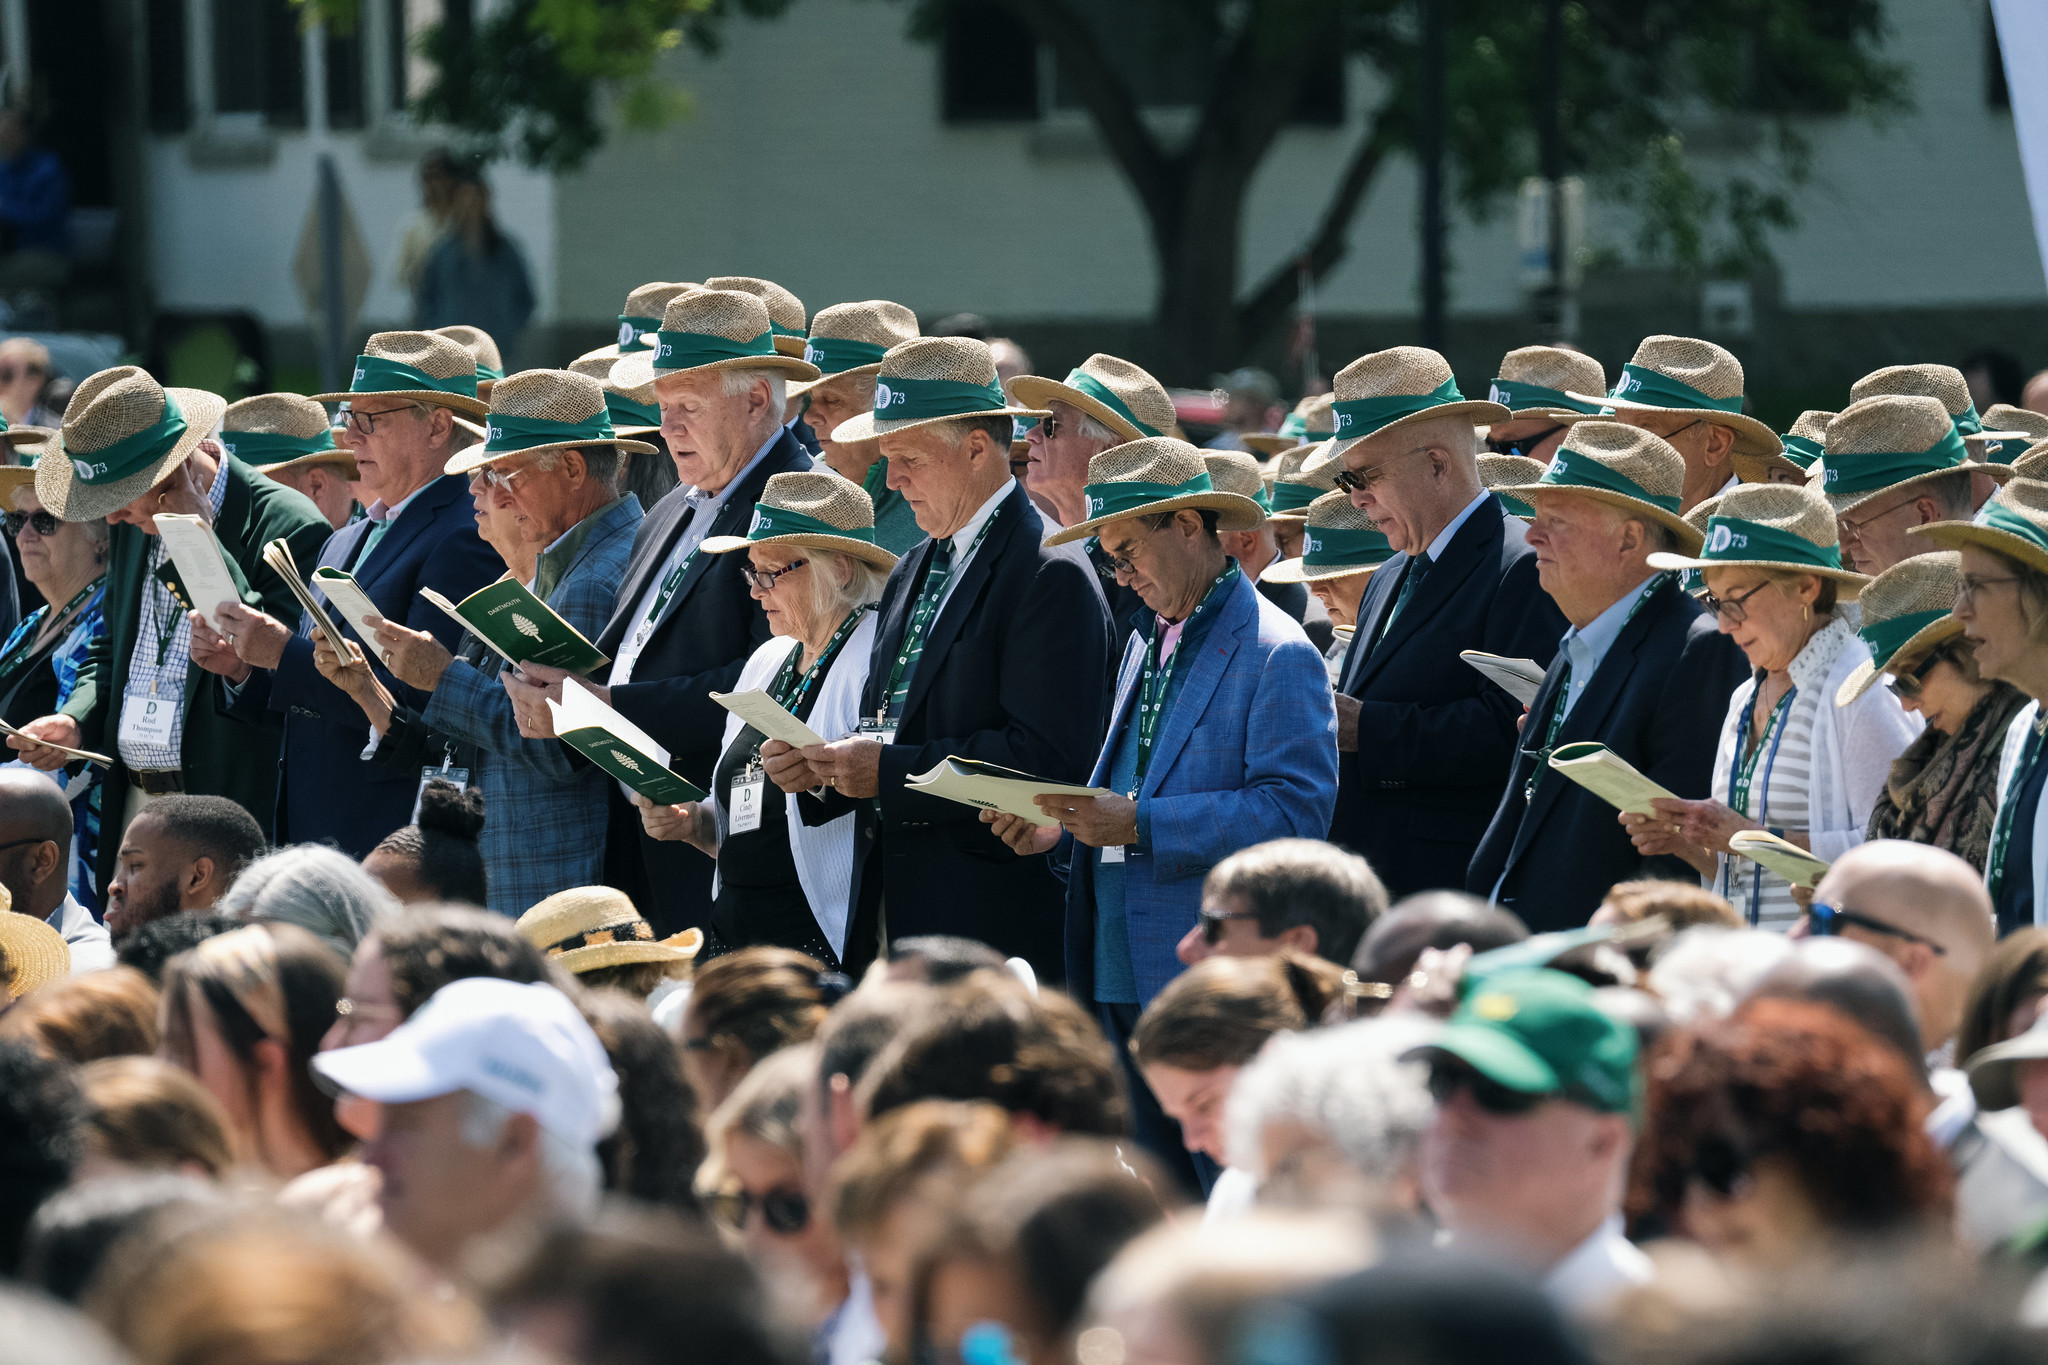 Class of 73 at commencement in matching straw hats.